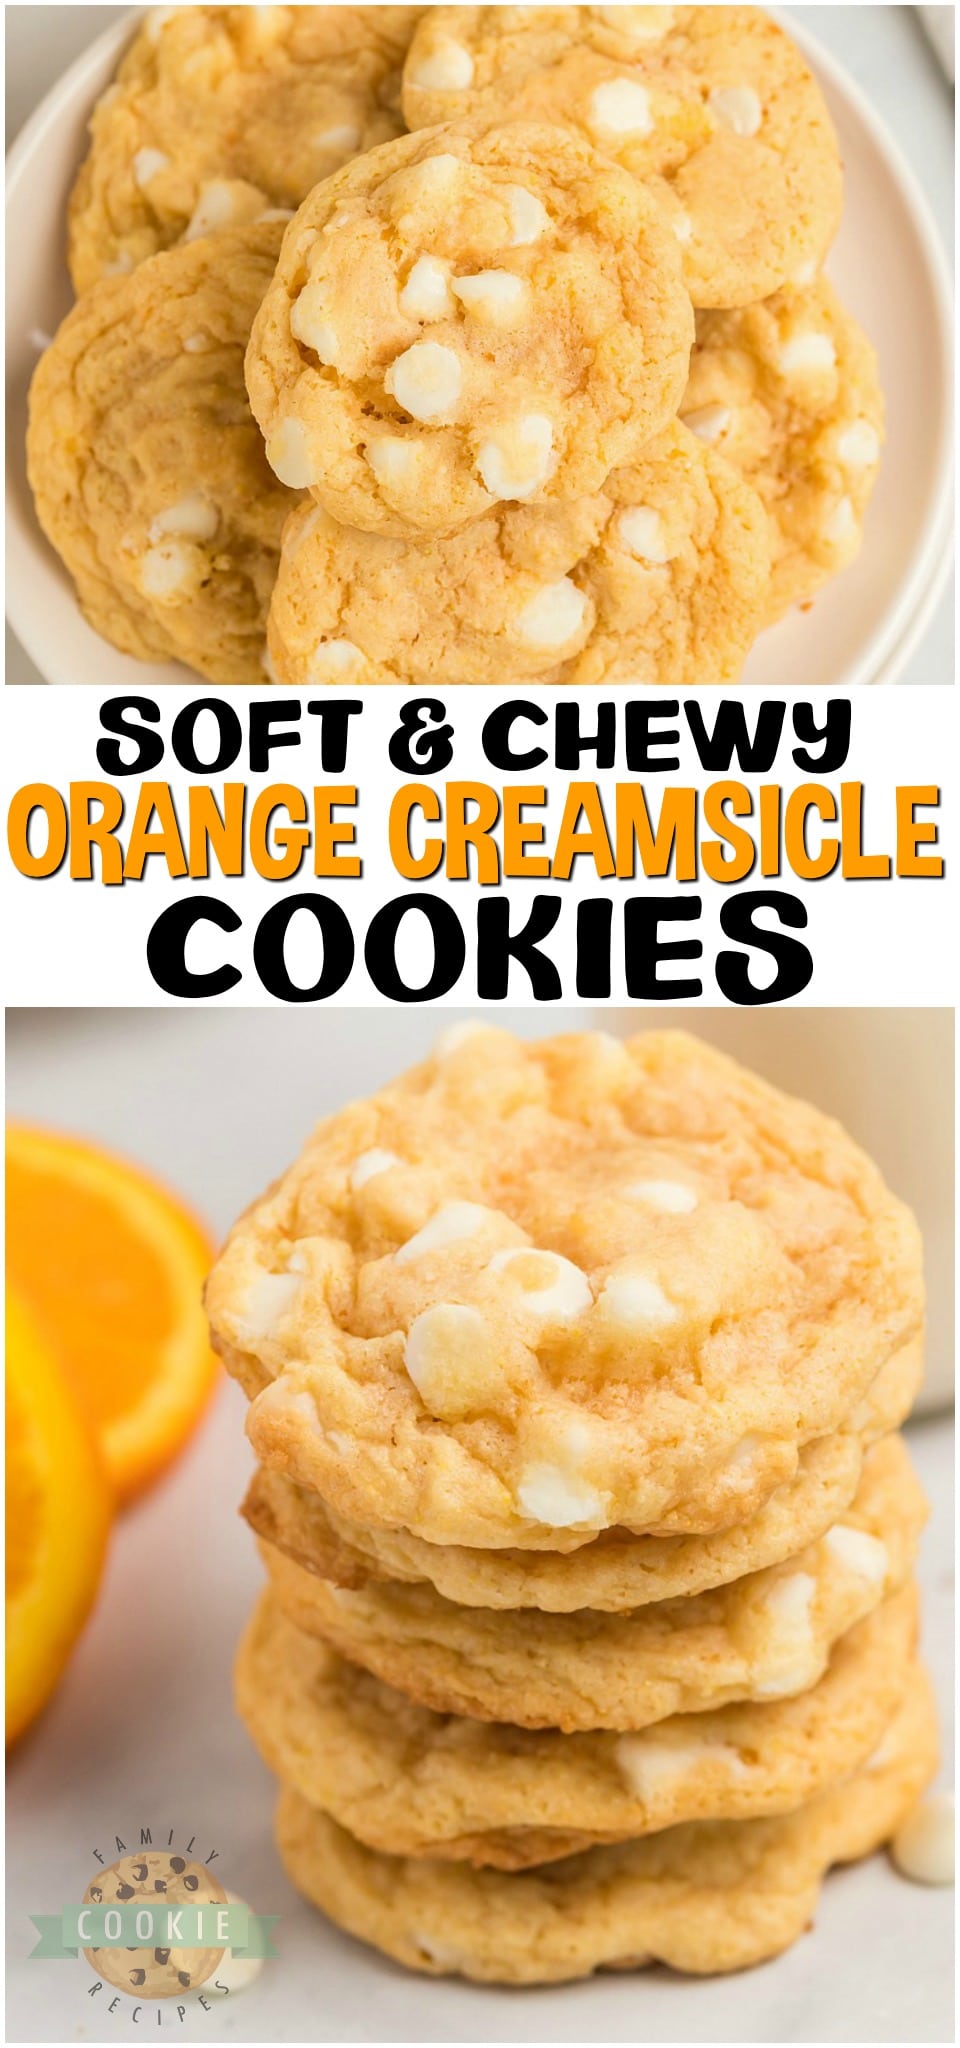 Orange Creamsicle Cookies are creamsicles in cookie form! Soft & chewy cookies with bright orange flavor and sweet white chocolate chips.